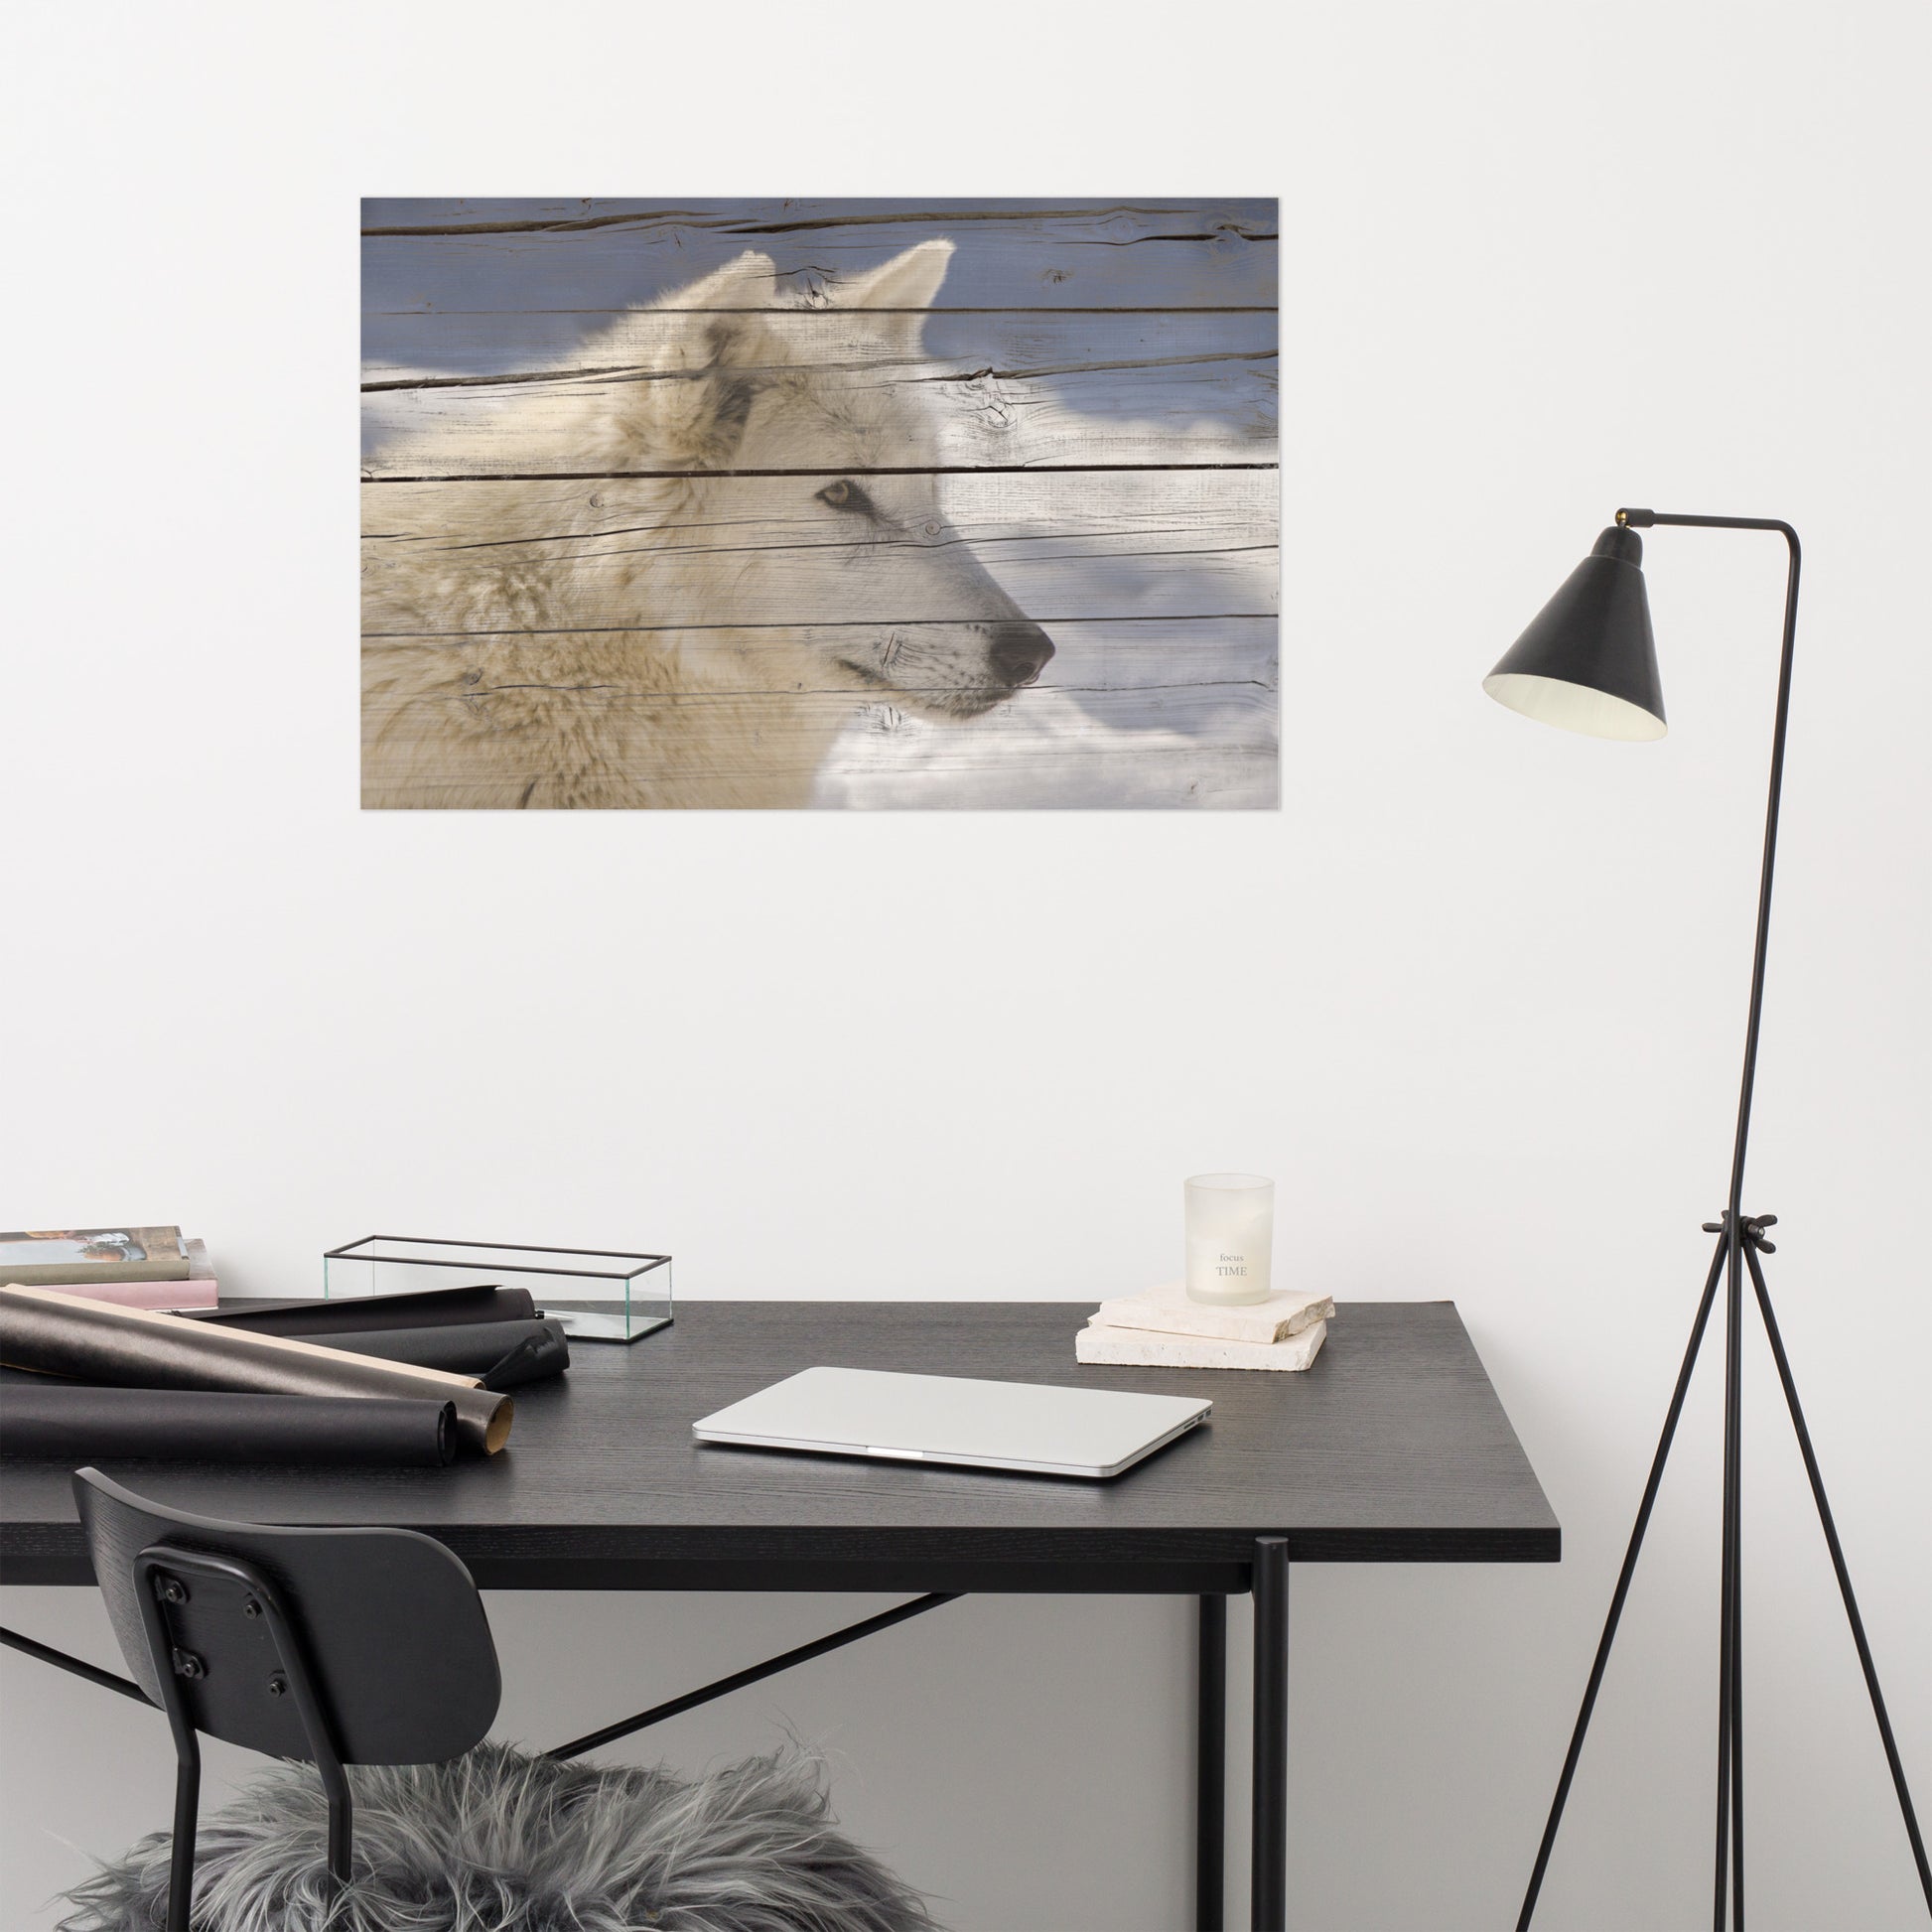 Quality Wall Art: Aries the White Wolf Portrait on Faux Weathered Wood Texture - Farmhouse / Country Style / Modern Wildlife / Animal Photographic Artwork